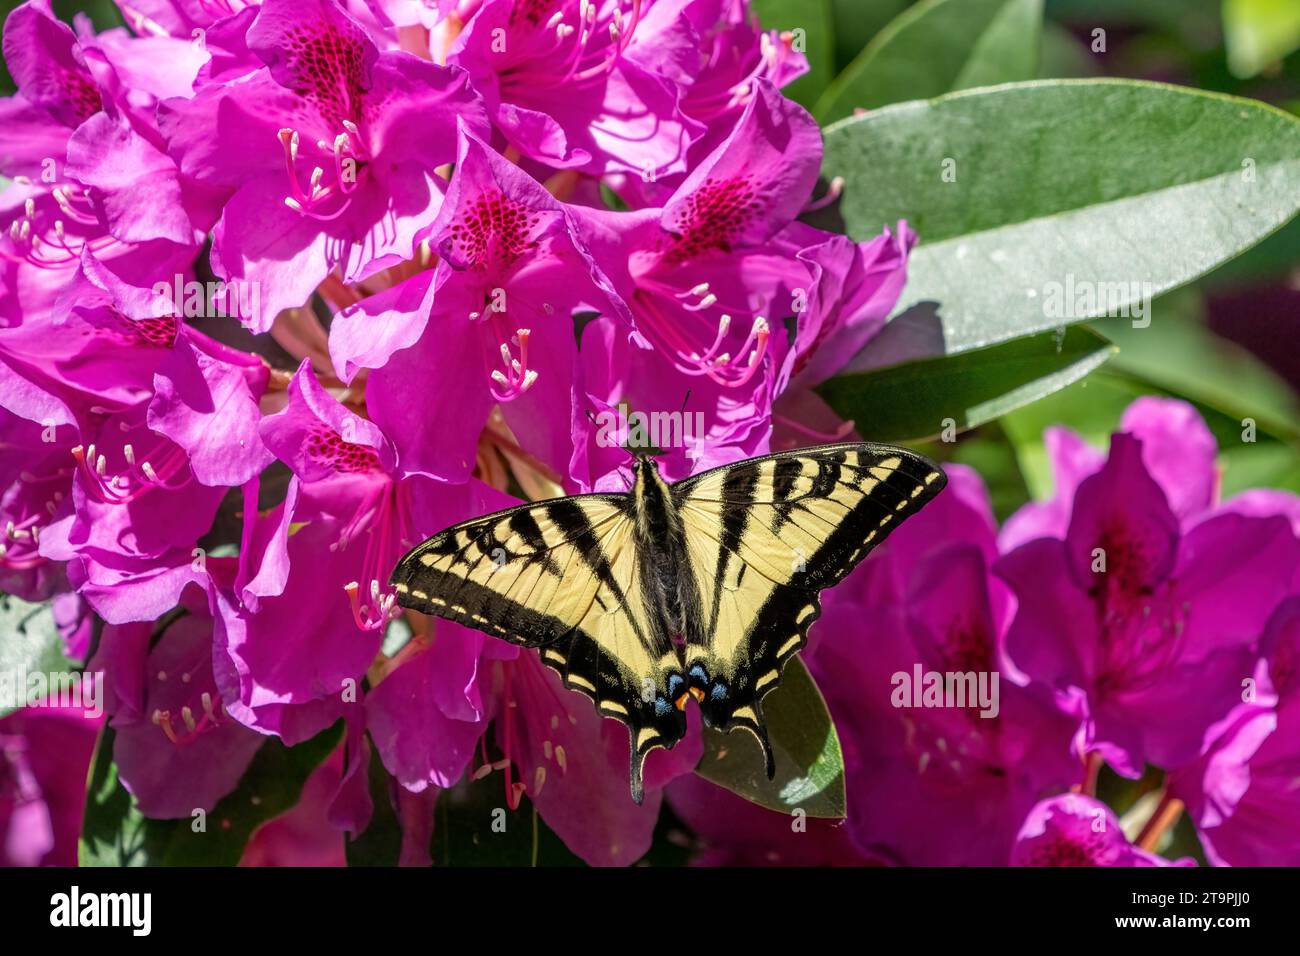 Issaquah, Washington, USA.   Western Tiger Swallowtail butterfly on a Pacific Rhododendron in bloom. Stock Photo